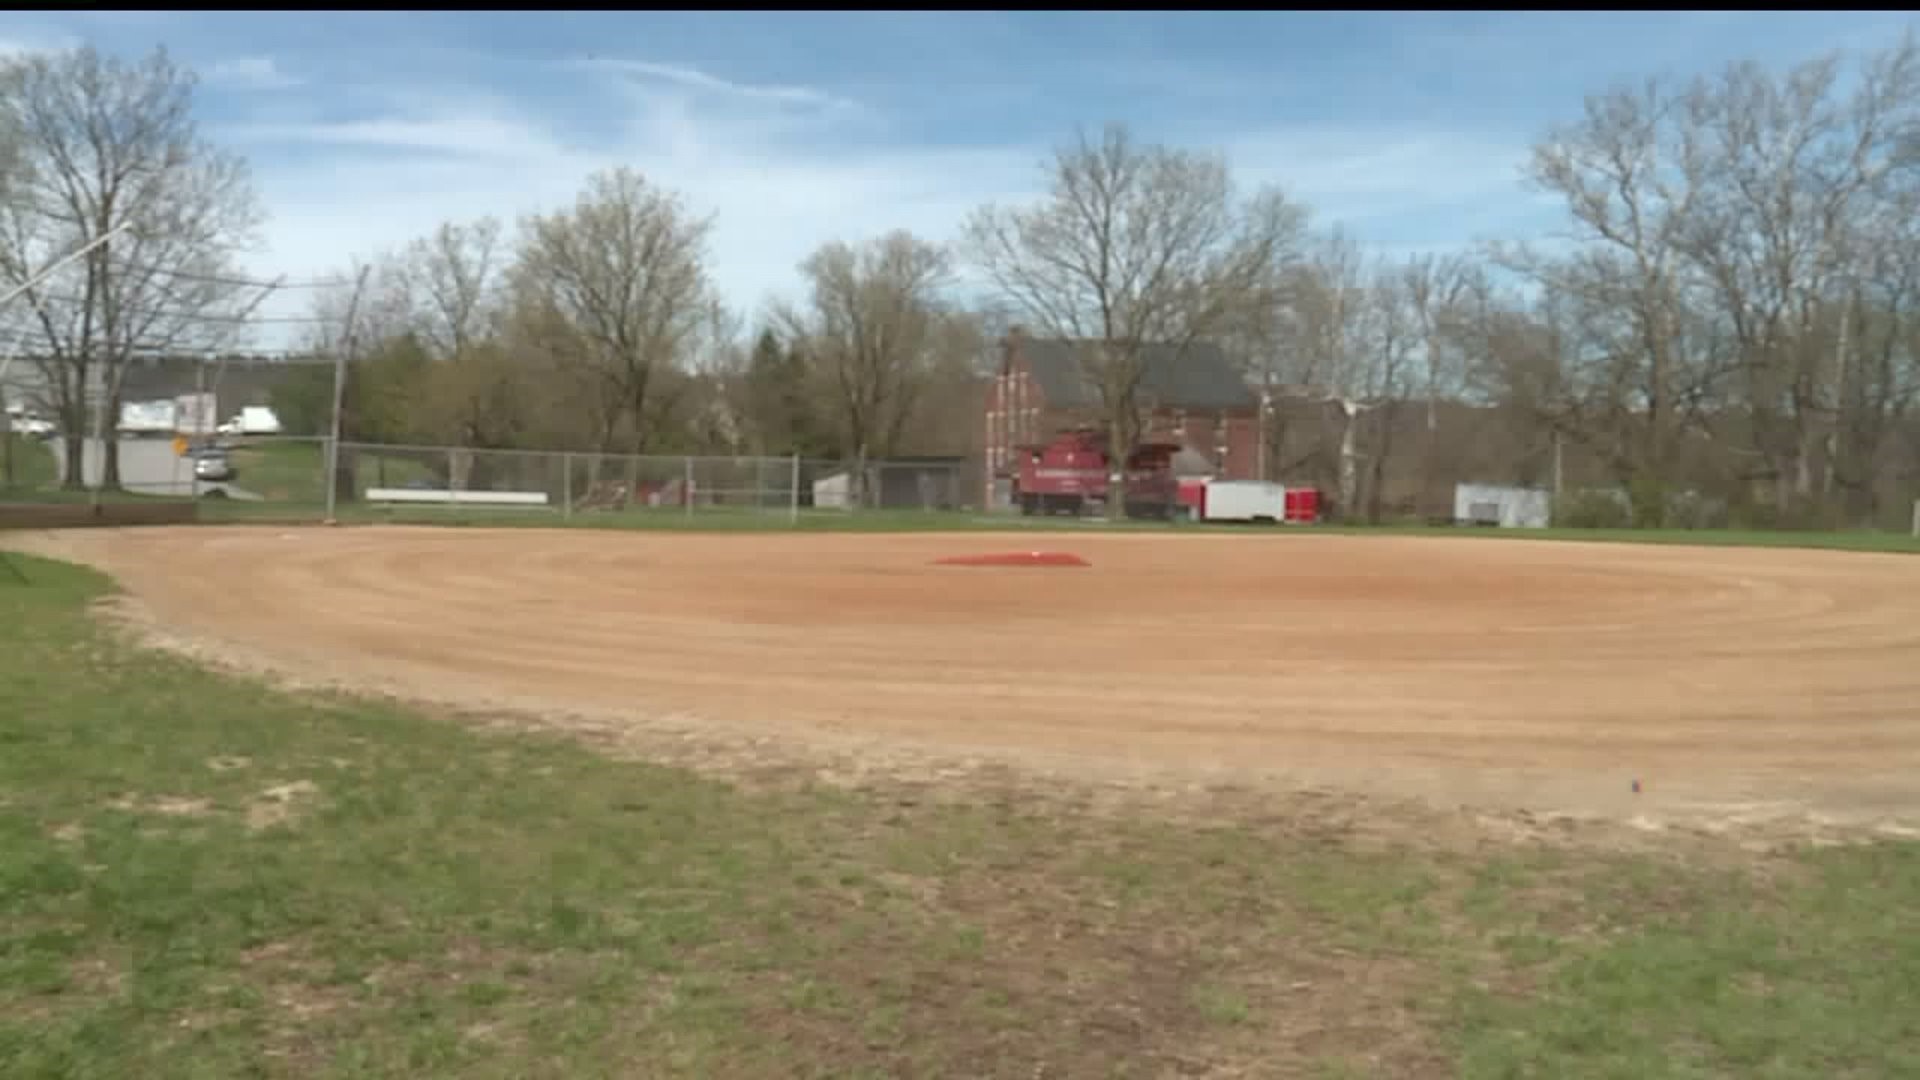 Months after their home field closed, York Little League plays on new fields